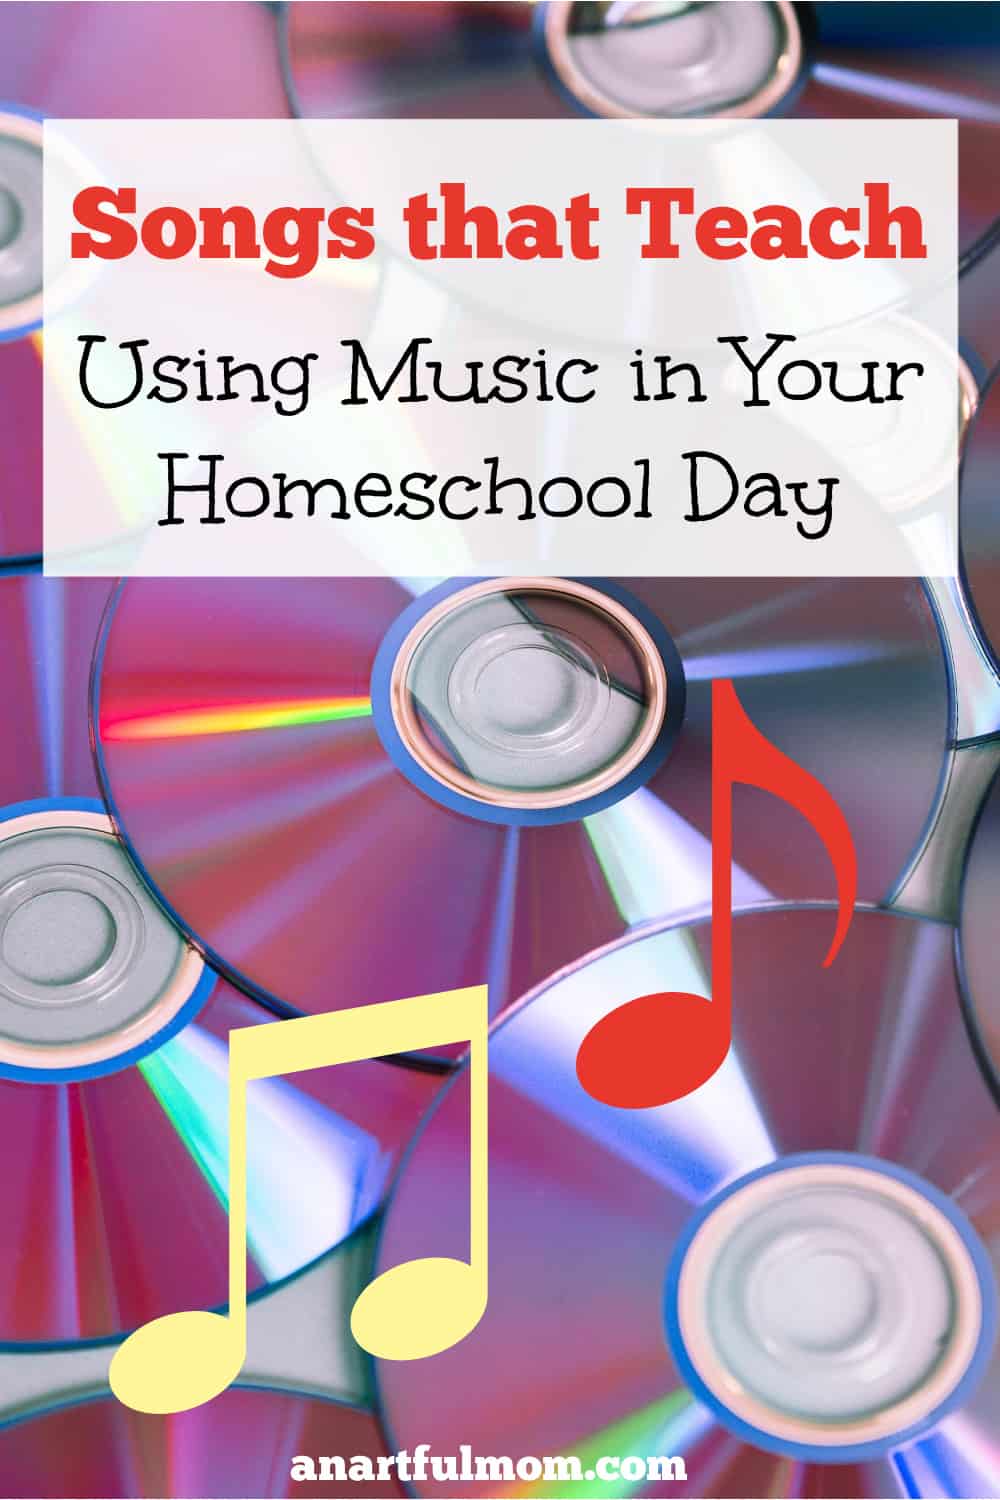 Songs that Teach: Using Music in Your Homeschool Day